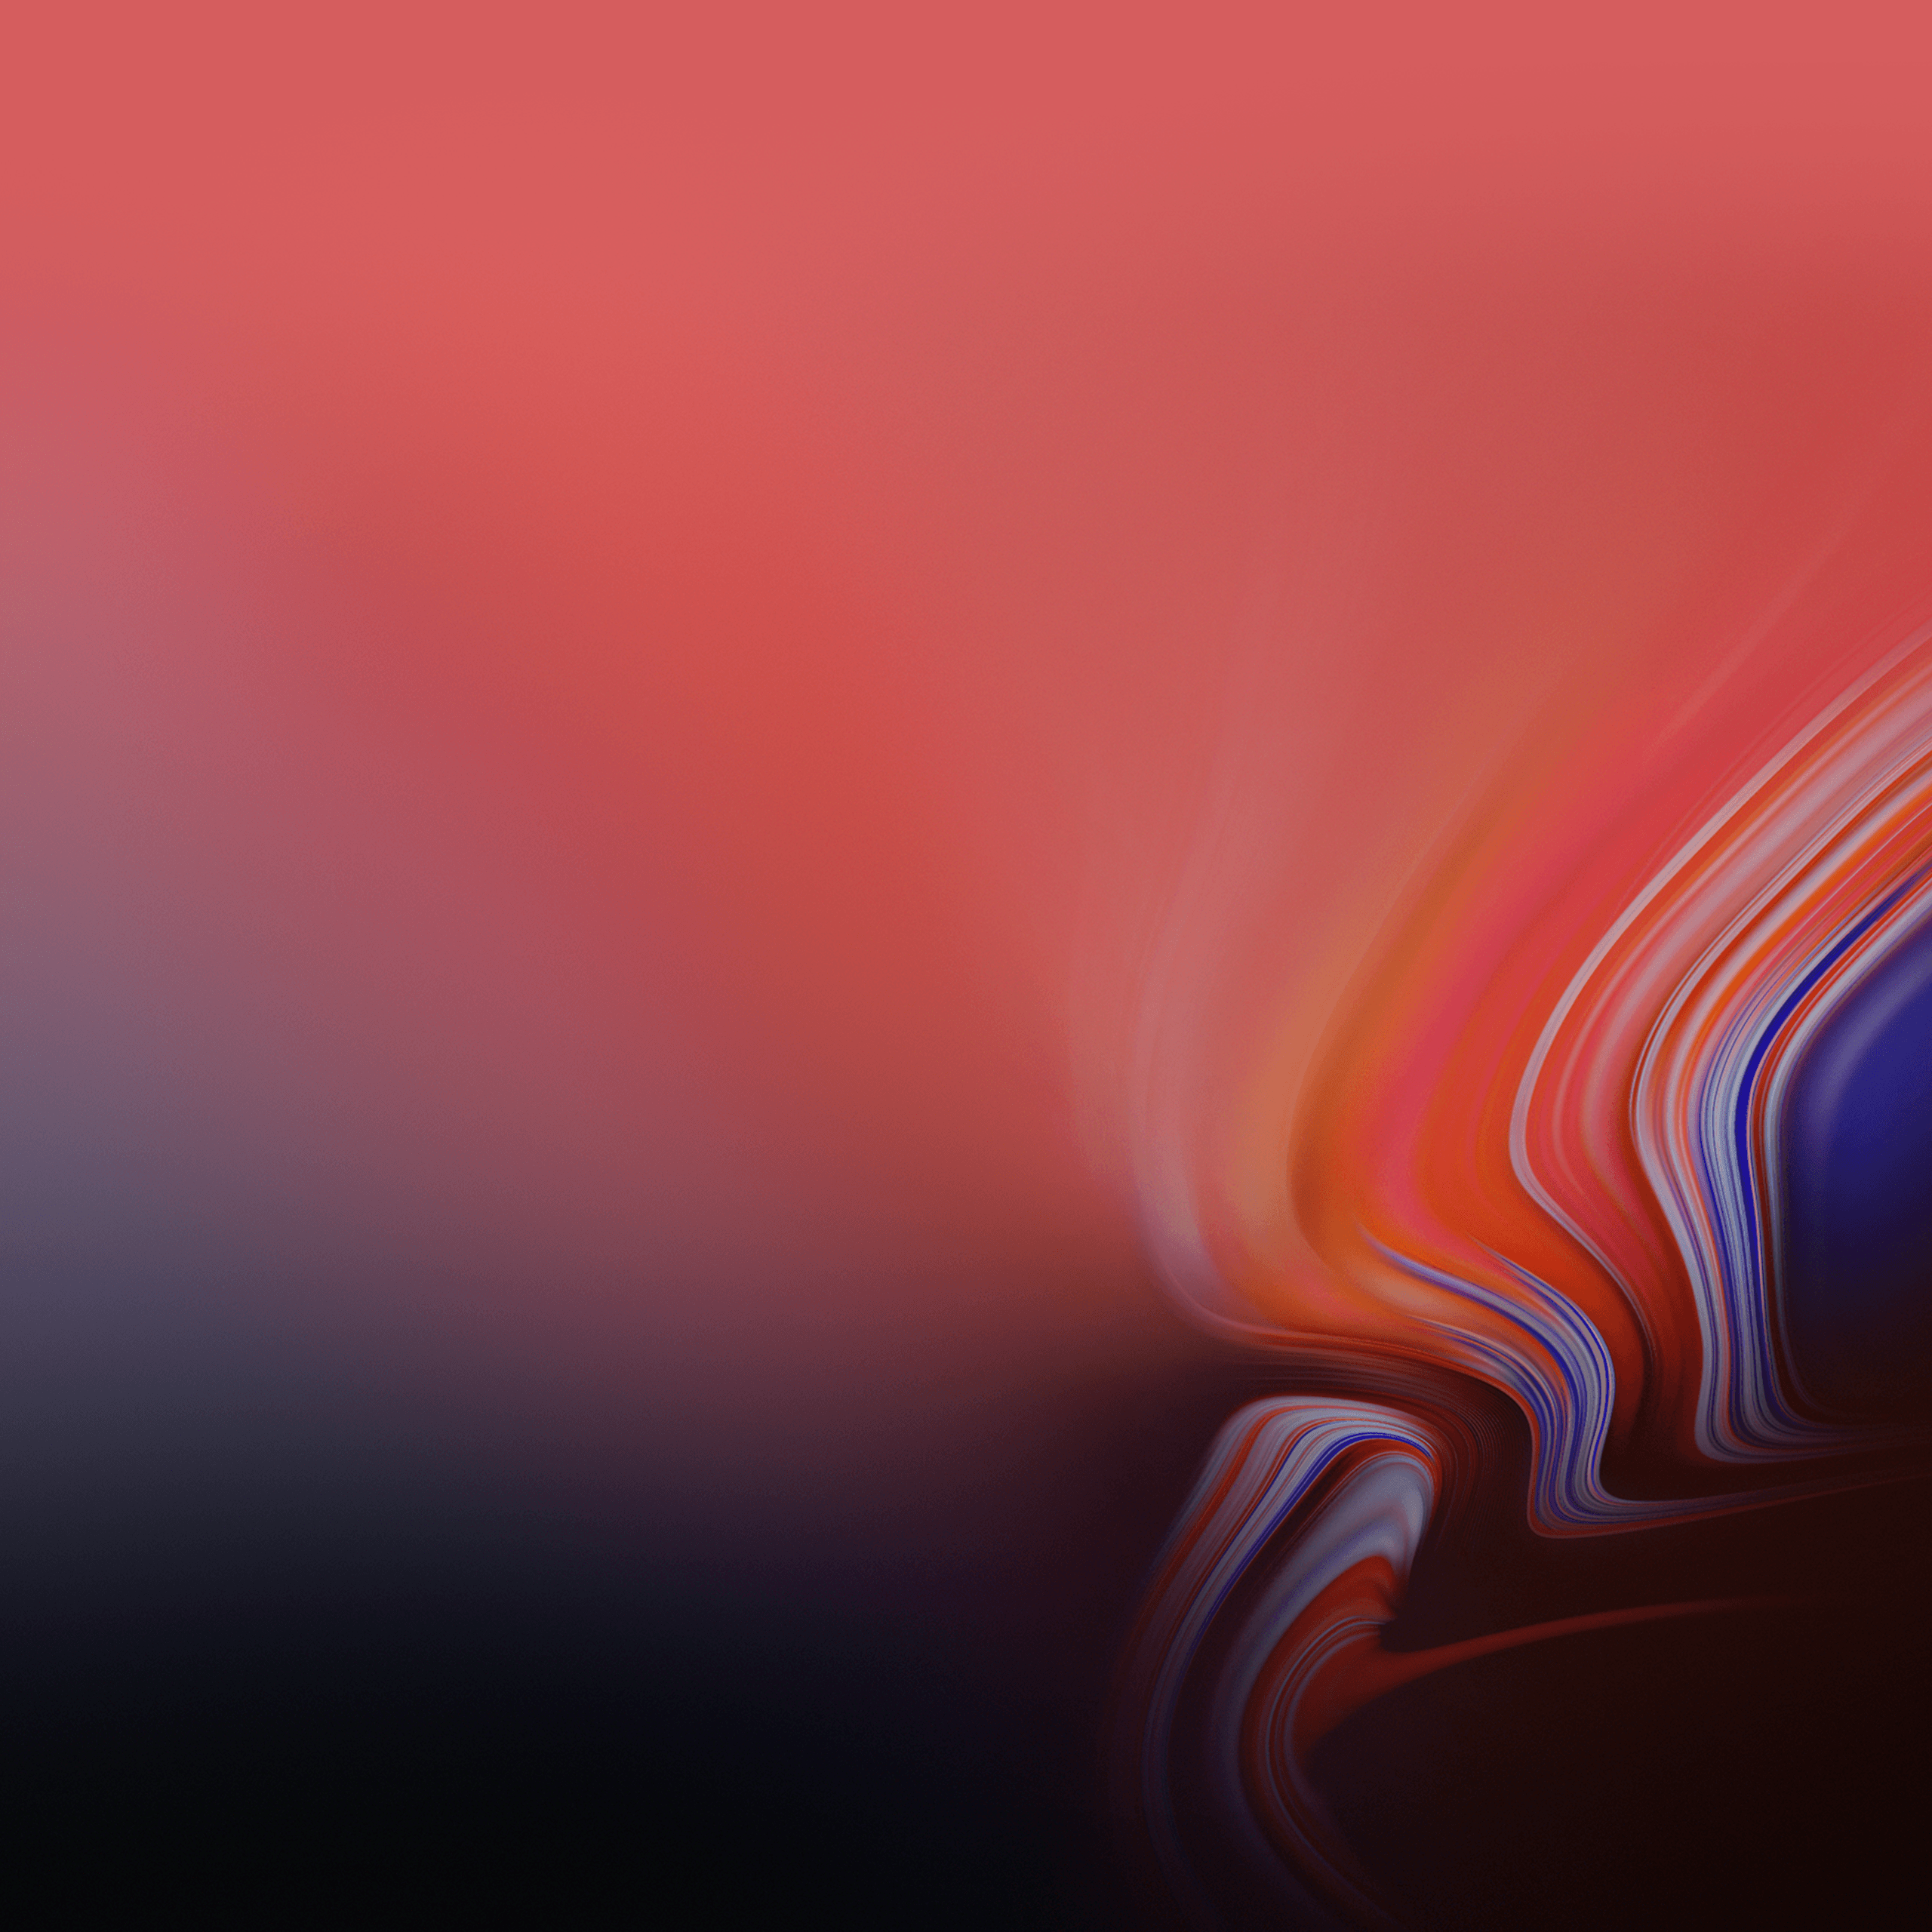 Here are all of the official wallpaper from the Galaxy Note9 and Tab S4